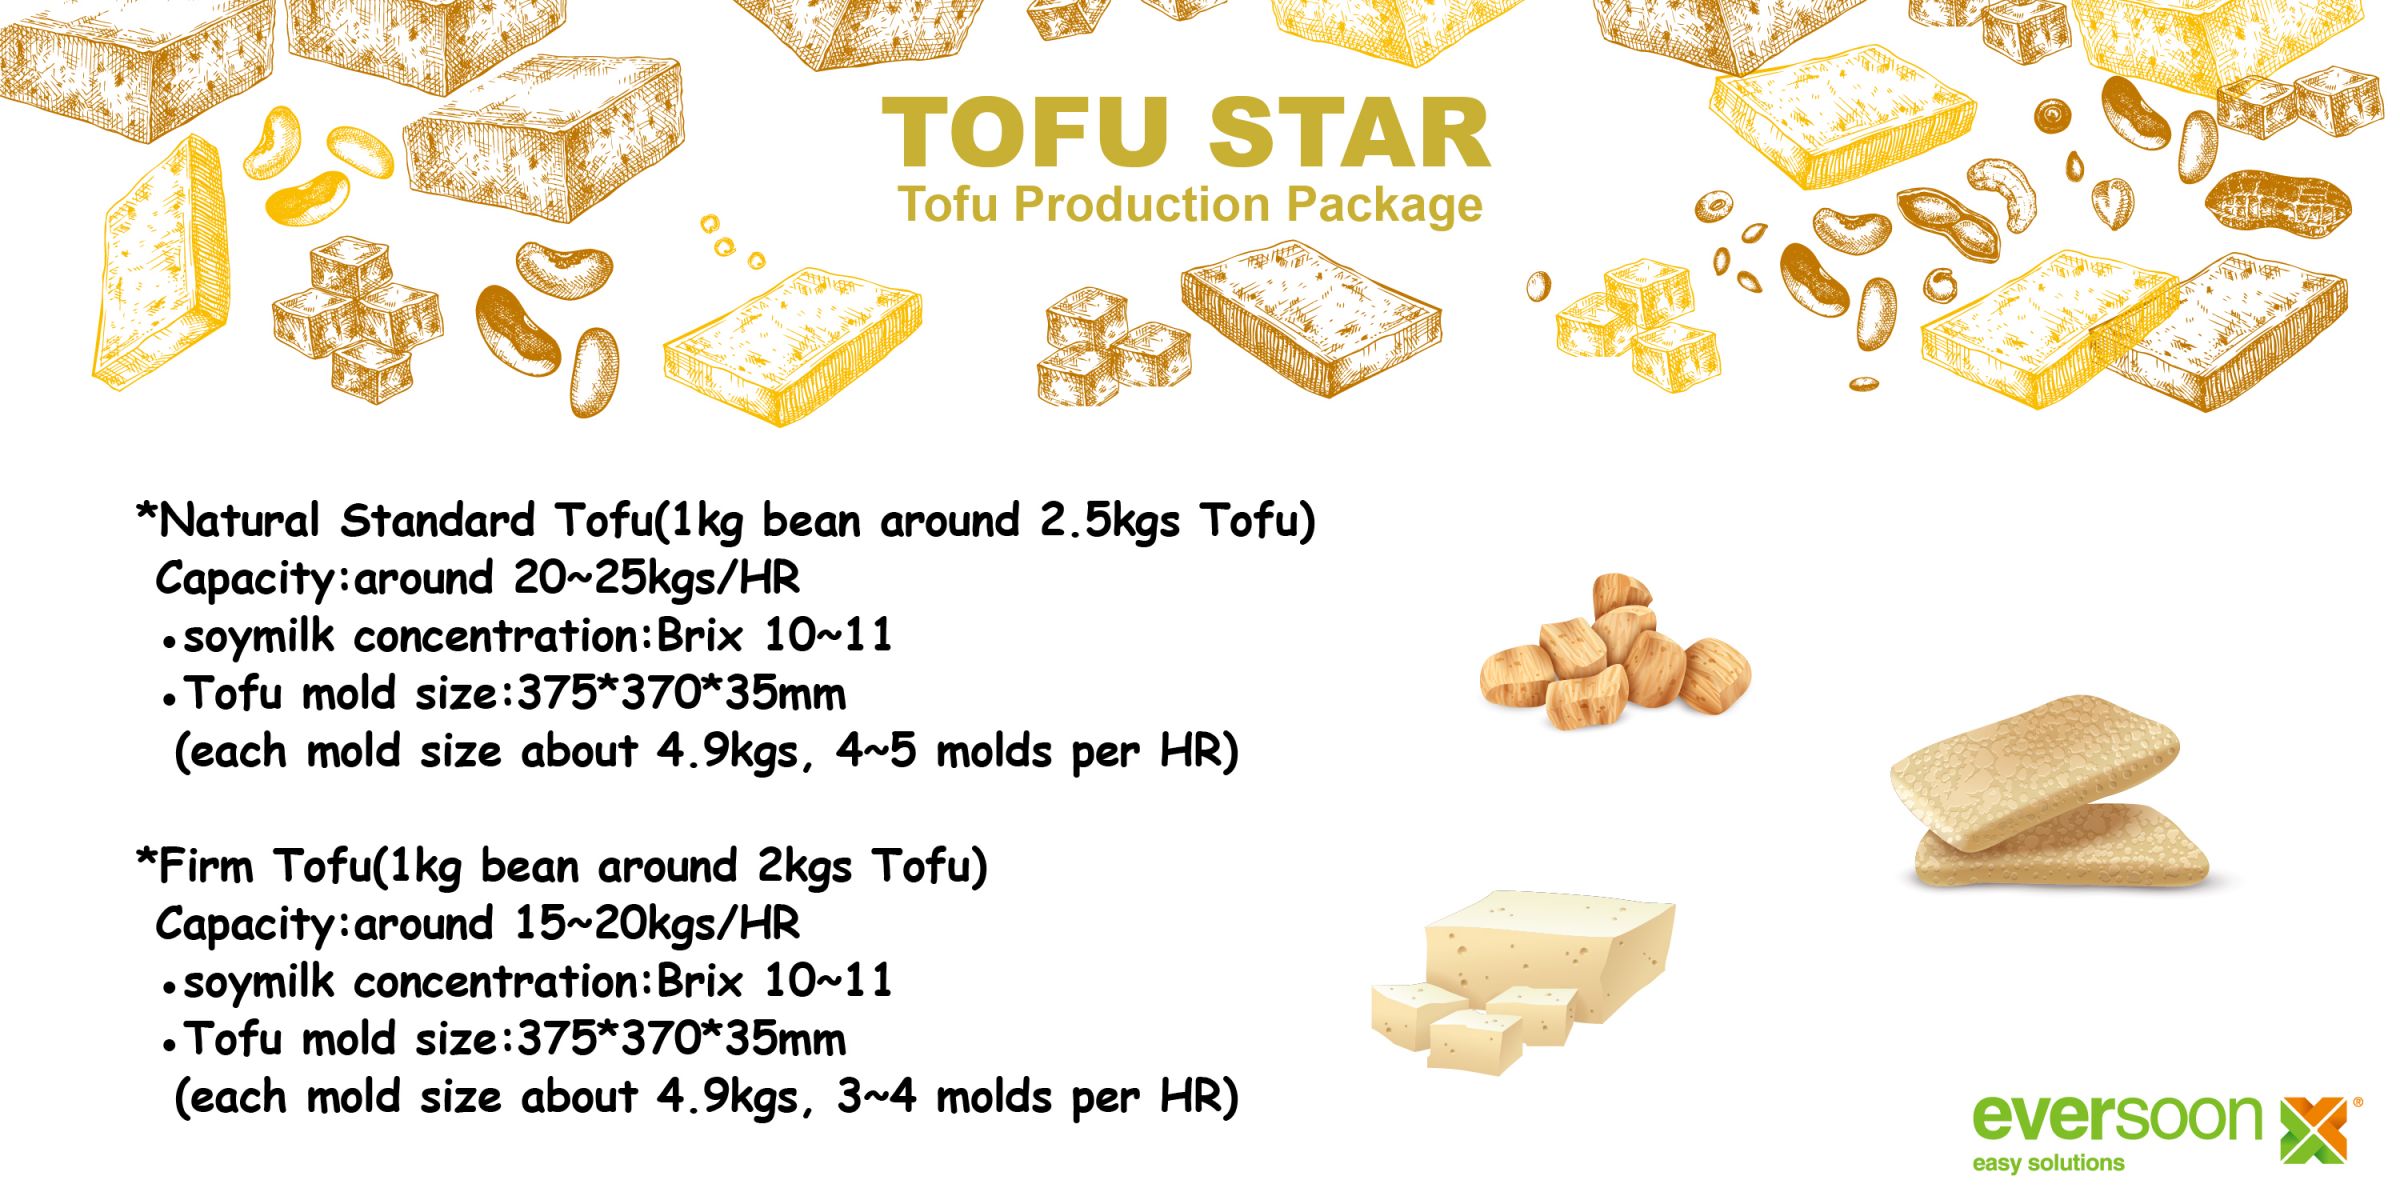 The Specification of Tofu Star